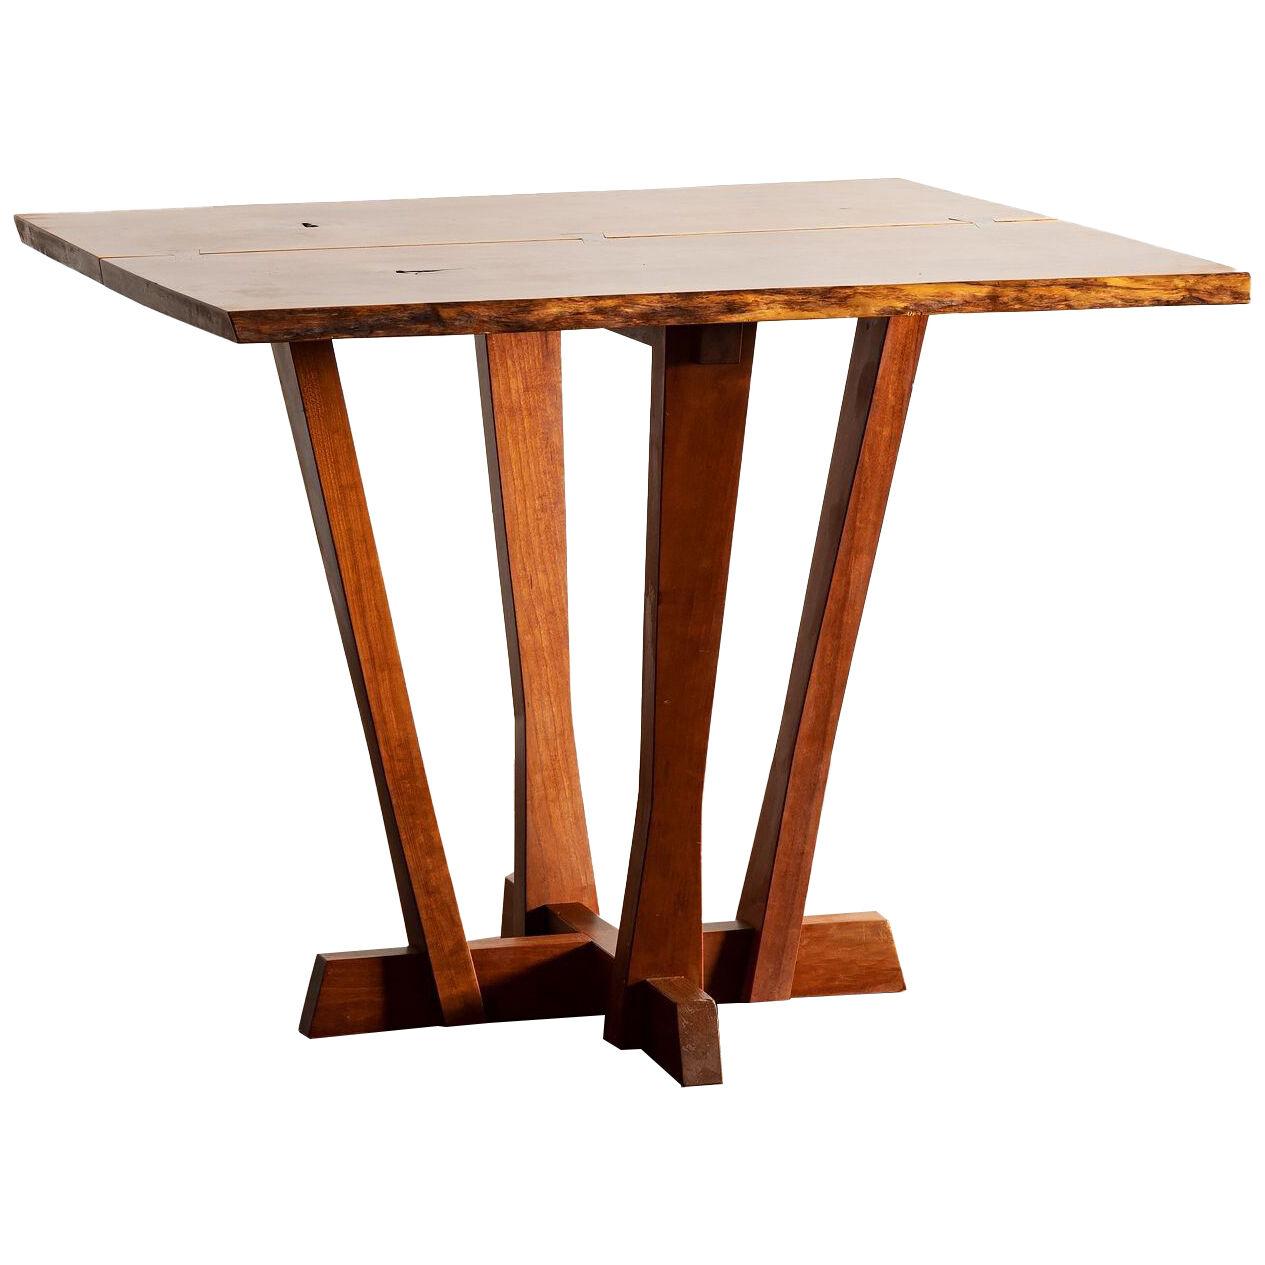 Mira Nakashima Special Bryfogel Table in Cherry and Laurel, 2008